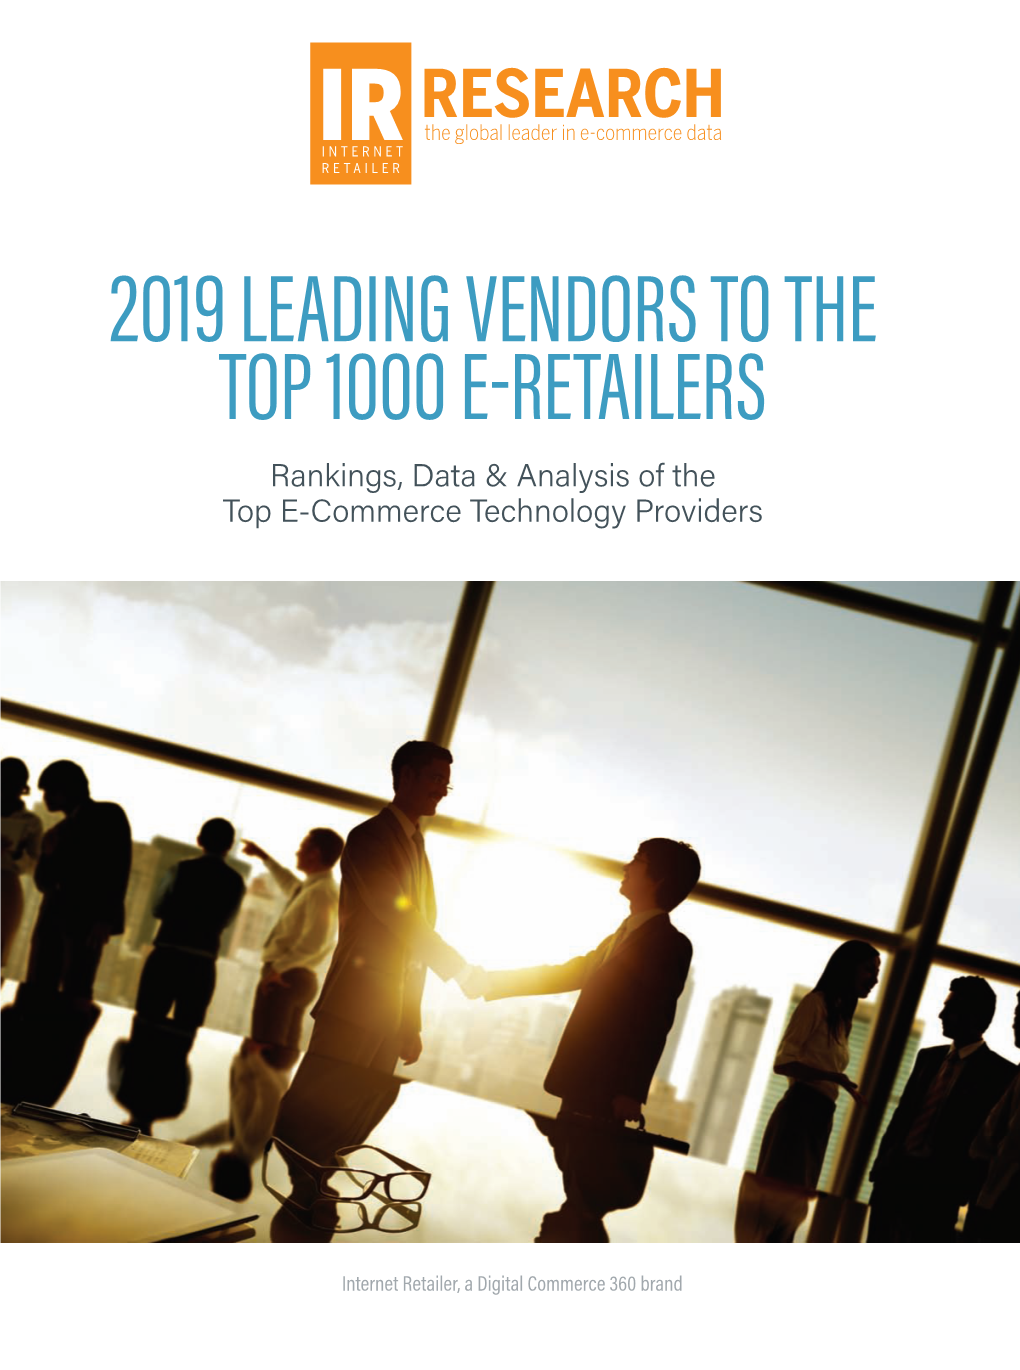 2019 LEADING VENDORS to the TOP 1000 E-RETAILERS Rankings, Data & Analysis of the Top E-Commerce Technology Providers